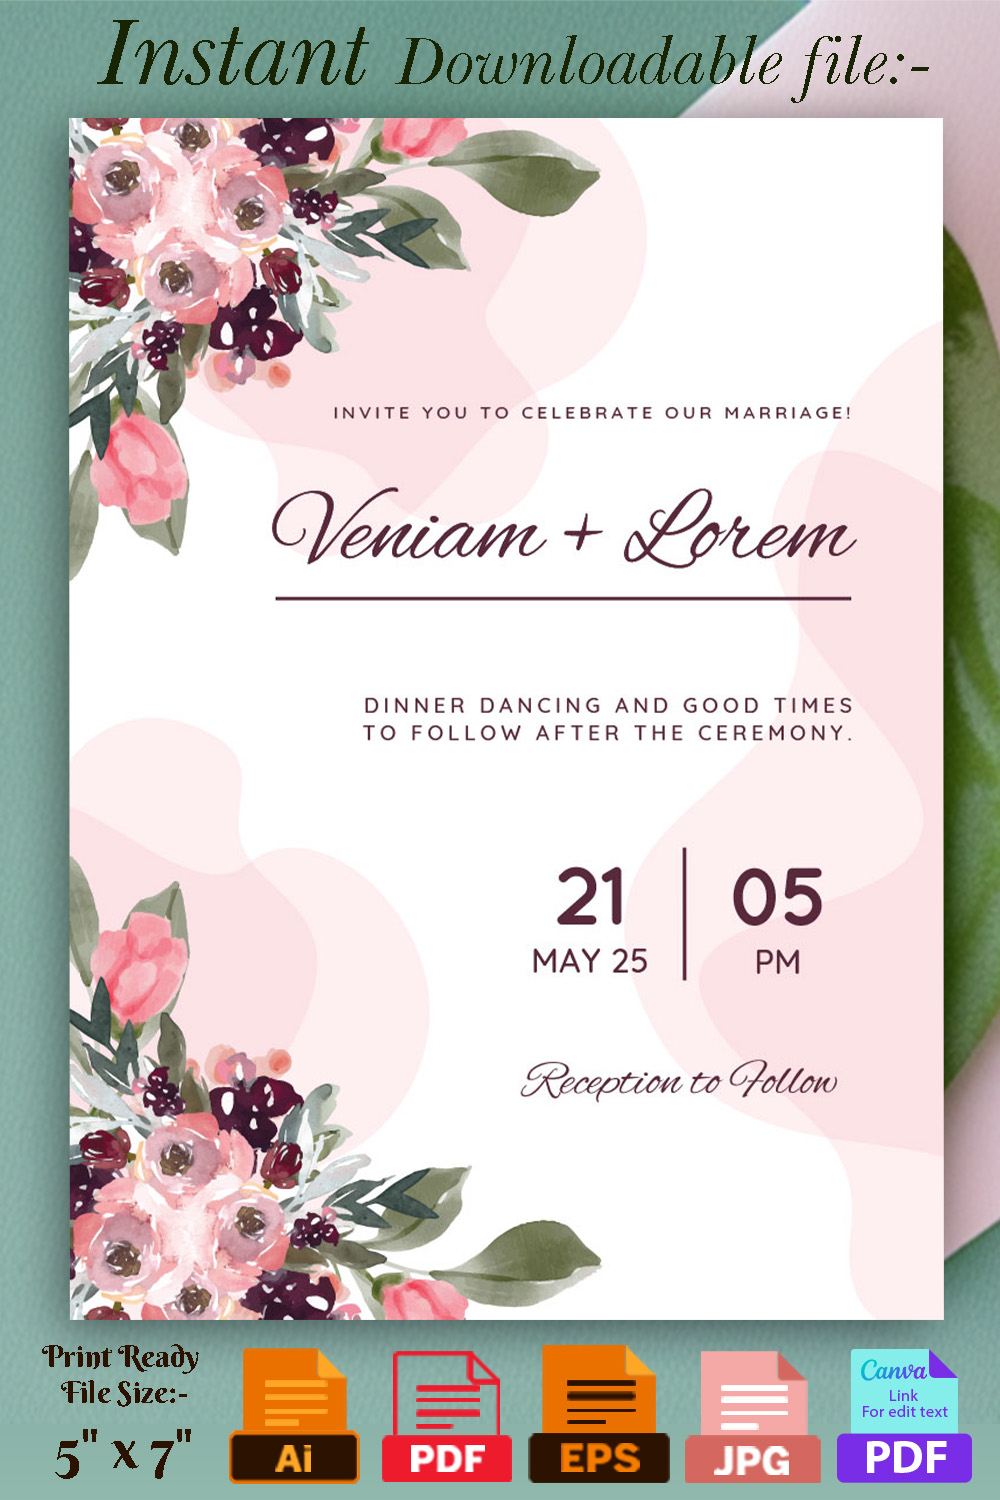 Image of an irresistible wedding invitation in combination with flowers and leaves.